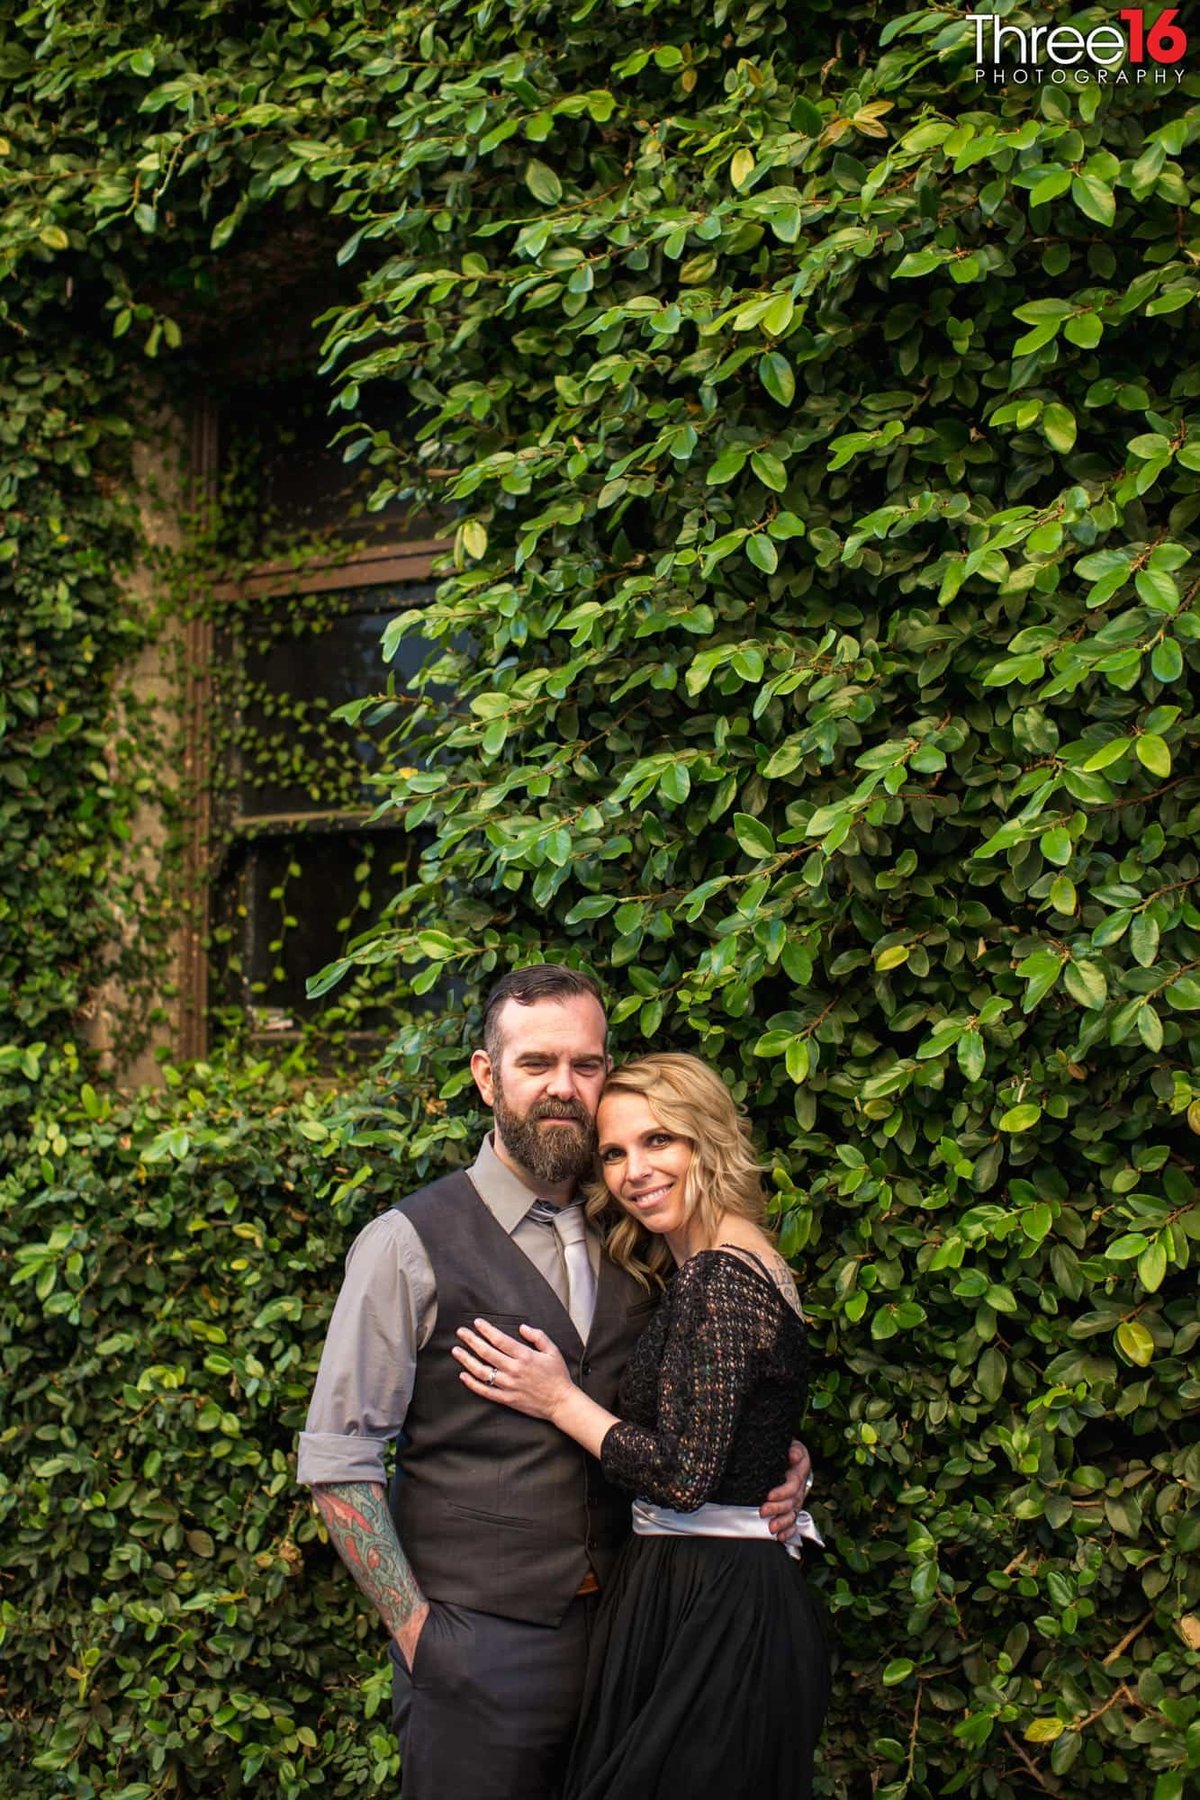 Engaged couple embrace as they pose for photos with an ivy filled wall behind them